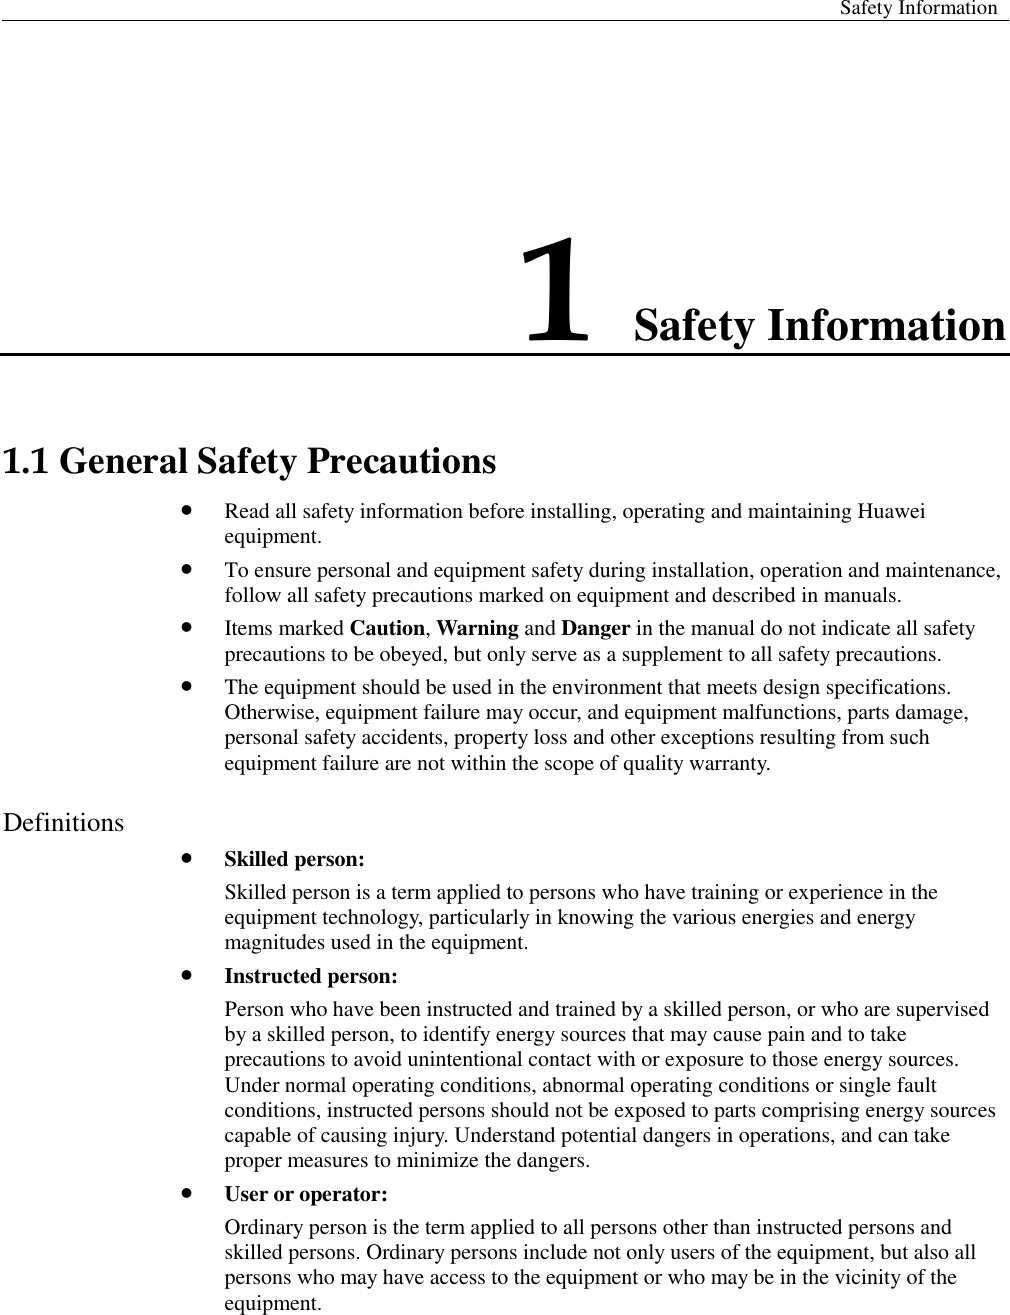  Safety Information  1 Safety Information 1.1 General Safety Precautions  Read all safety information before installing, operating and maintaining Huawei equipment.    To ensure personal and equipment safety during installation, operation and maintenance, follow all safety precautions marked on equipment and described in manuals.    Items marked Caution, Warning and Danger in the manual do not indicate all safety precautions to be obeyed, but only serve as a supplement to all safety precautions.  The equipment should be used in the environment that meets design specifications. Otherwise, equipment failure may occur, and equipment malfunctions, parts damage, personal safety accidents, property loss and other exceptions resulting from such equipment failure are not within the scope of quality warranty. Definitions  Skilled person: Skilled person is a term applied to persons who have training or experience in the equipment technology, particularly in knowing the various energies and energy magnitudes used in the equipment.  Instructed person: Person who have been instructed and trained by a skilled person, or who are supervised by a skilled person, to identify energy sources that may cause pain and to take precautions to avoid unintentional contact with or exposure to those energy sources. Under normal operating conditions, abnormal operating conditions or single fault conditions, instructed persons should not be exposed to parts comprising energy sources capable of causing injury. Understand potential dangers in operations, and can take proper measures to minimize the dangers.  User or operator: Ordinary person is the term applied to all persons other than instructed persons and skilled persons. Ordinary persons include not only users of the equipment, but also all persons who may have access to the equipment or who may be in the vicinity of the equipment. 